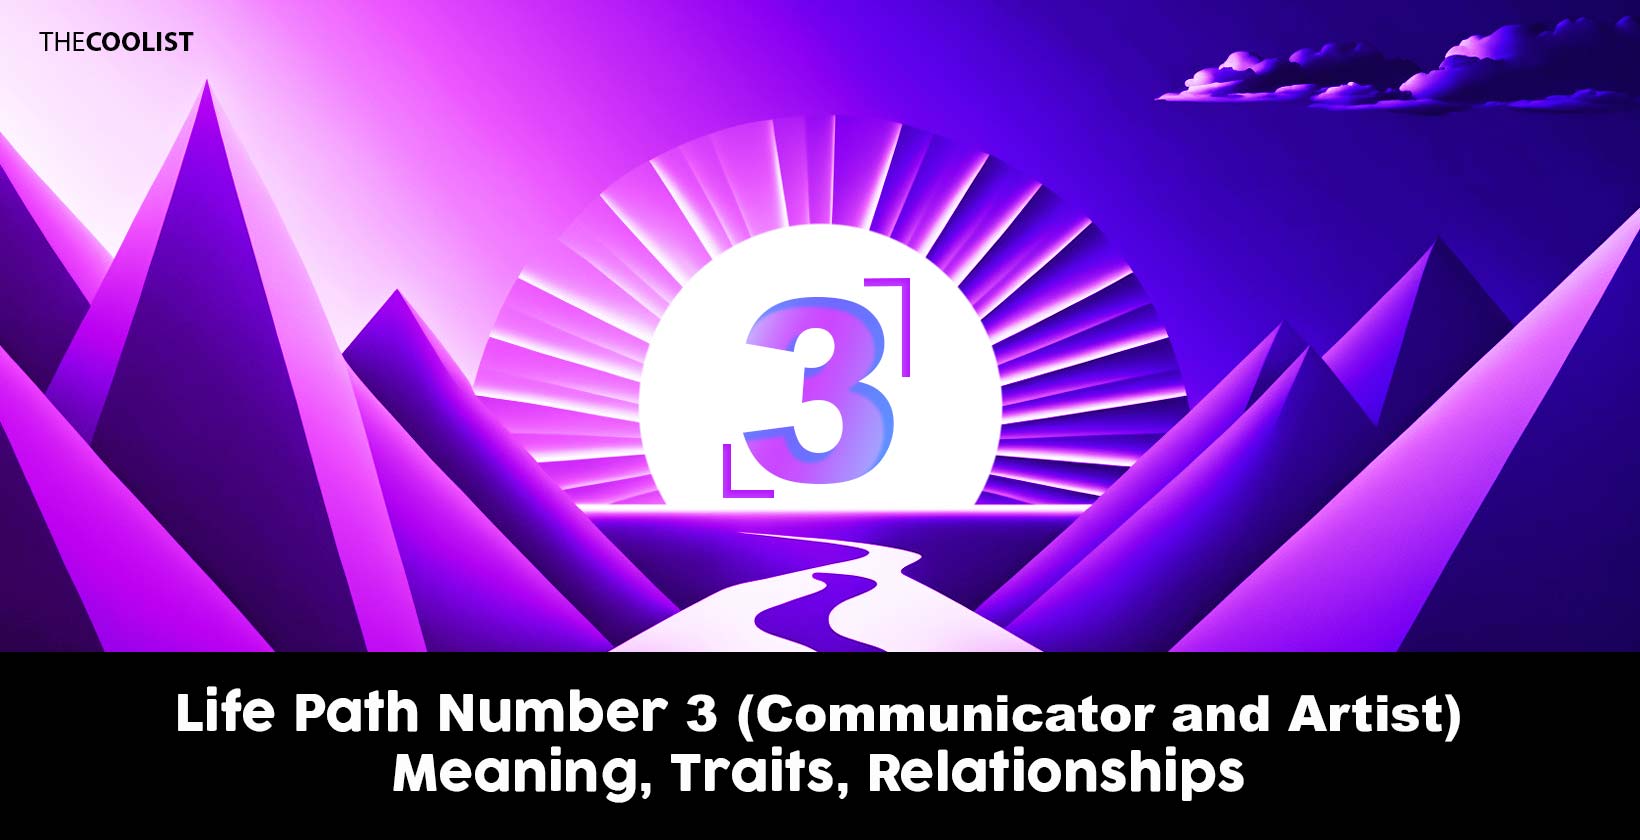 Life Path Number 3 (Communicator and Artist) Meaning, Traits, and Relationships